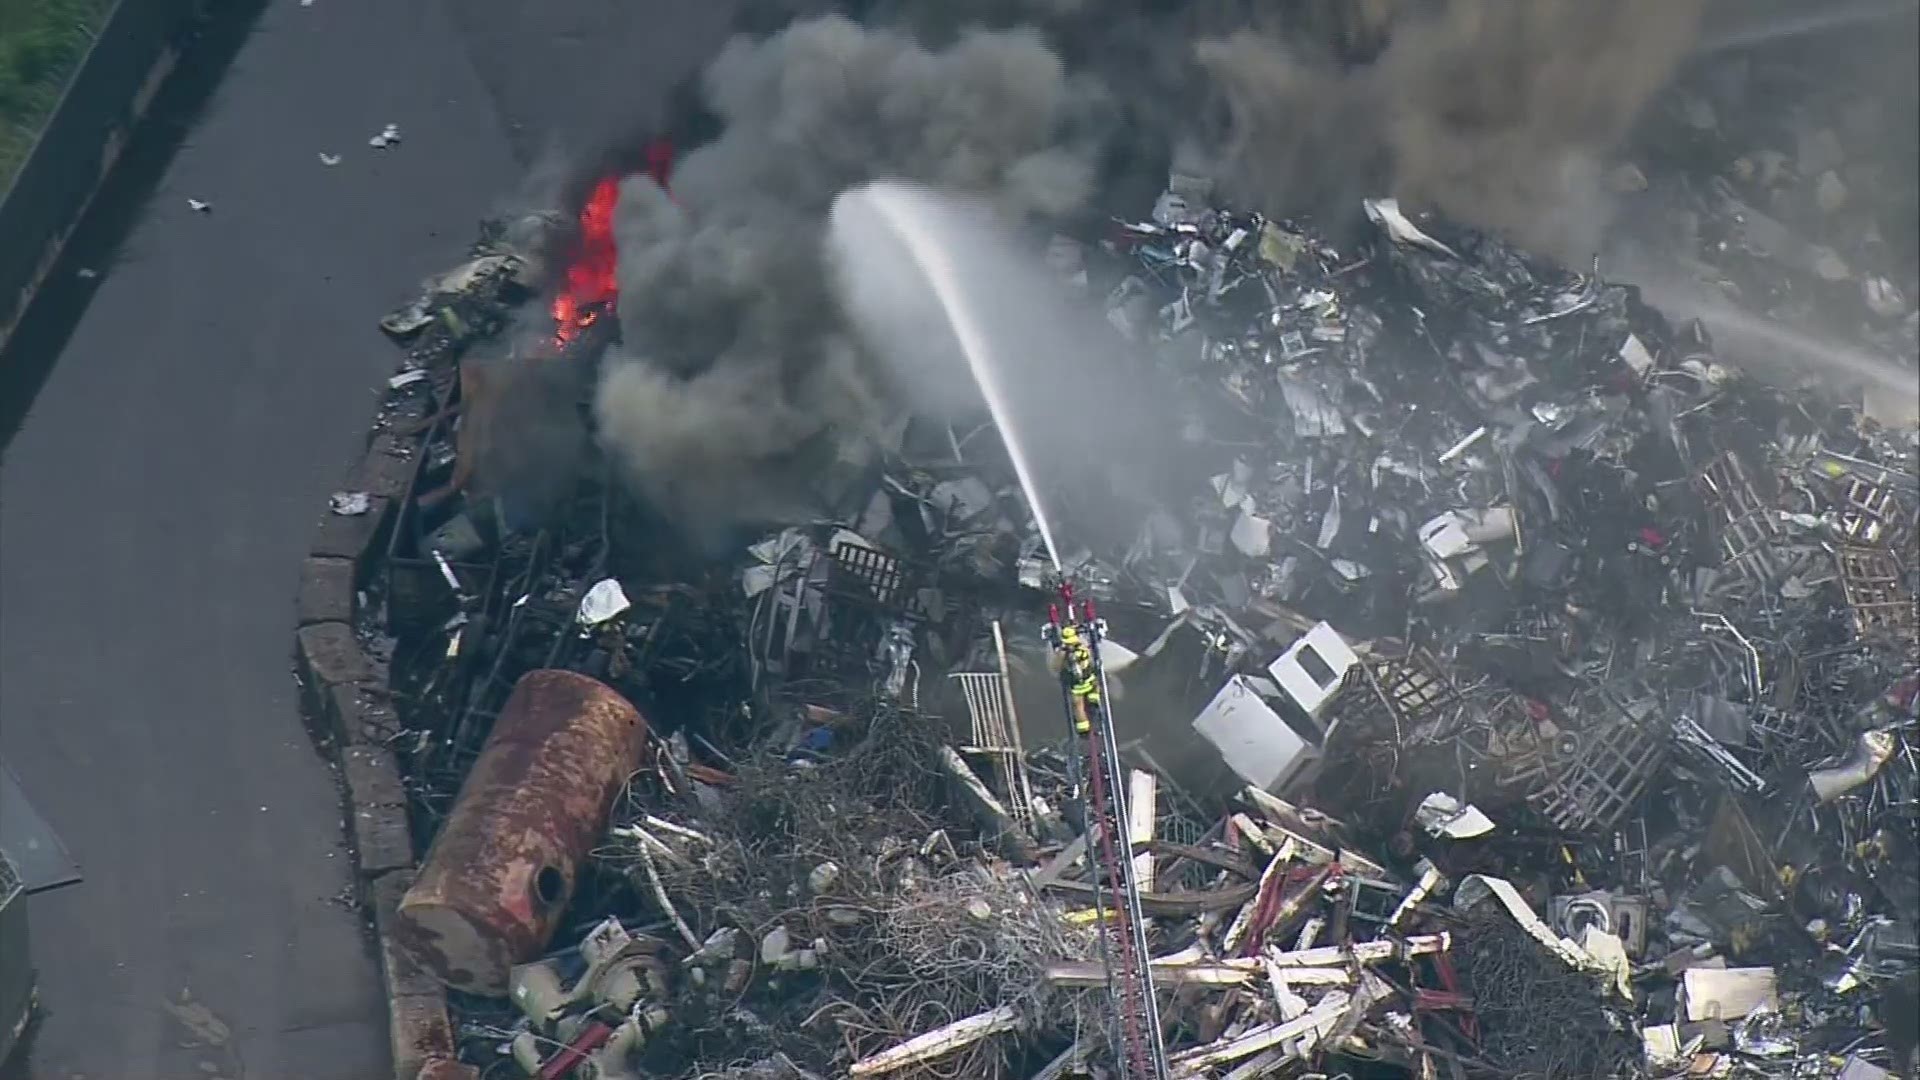 A large fire has broken out at a metal recycling plant in Woodinville, near Bothell.